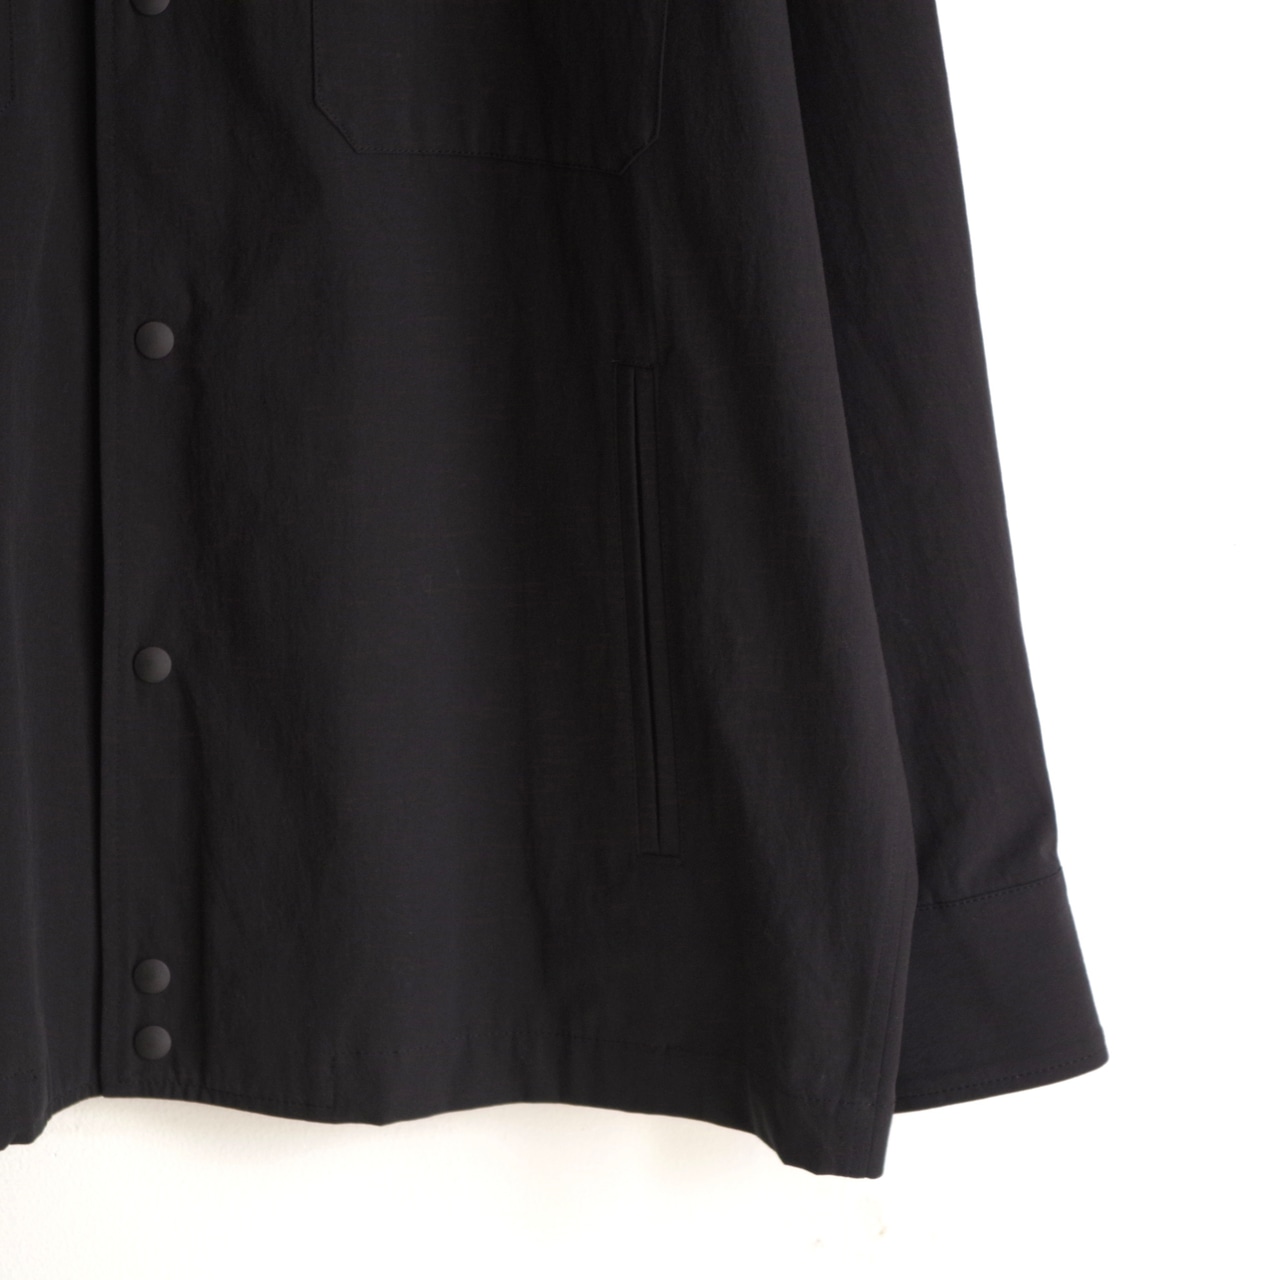 comm.arch.  Cotton Gass Twill Jacket  Blackout